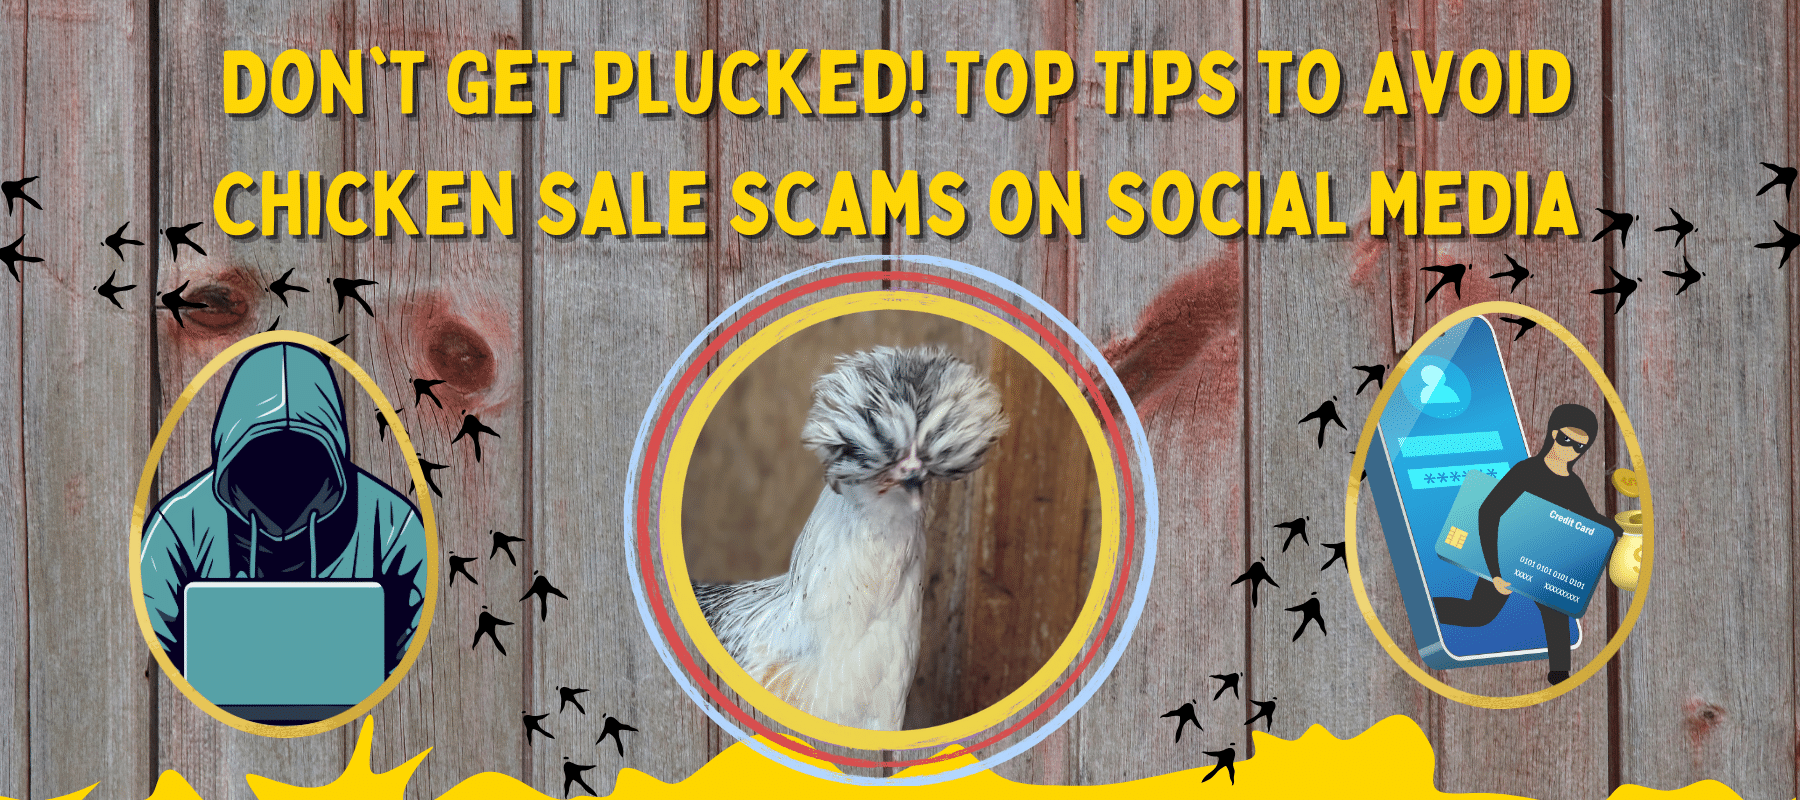 Don't Get Plucked! Top Tips to Avoid Chicken Sale Scams on Social Media